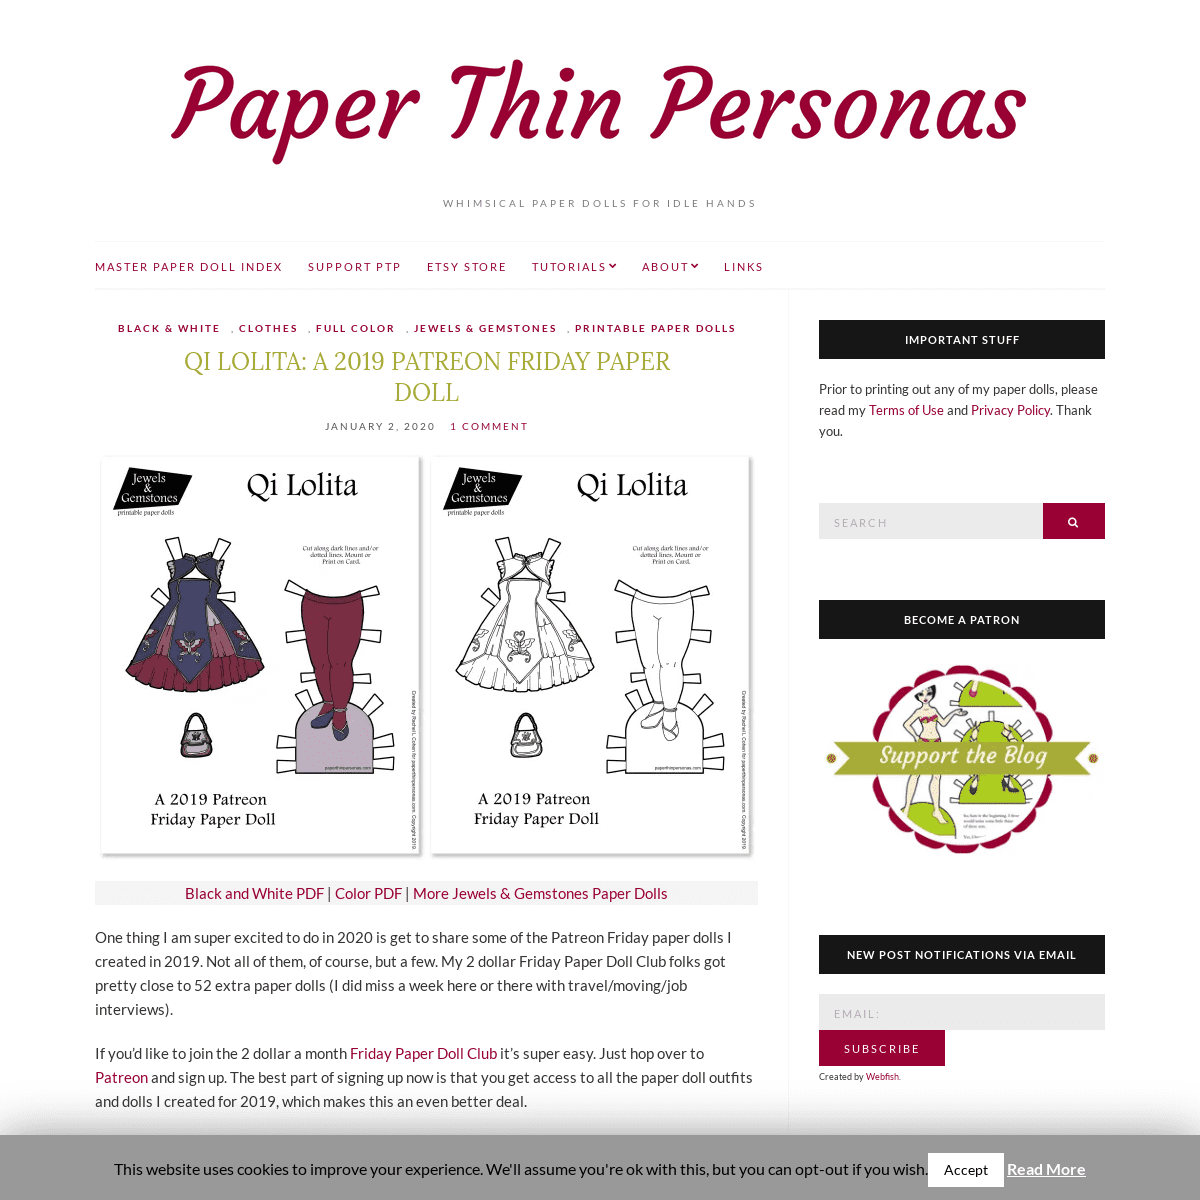 A complete backup of paperthinpersonas.com